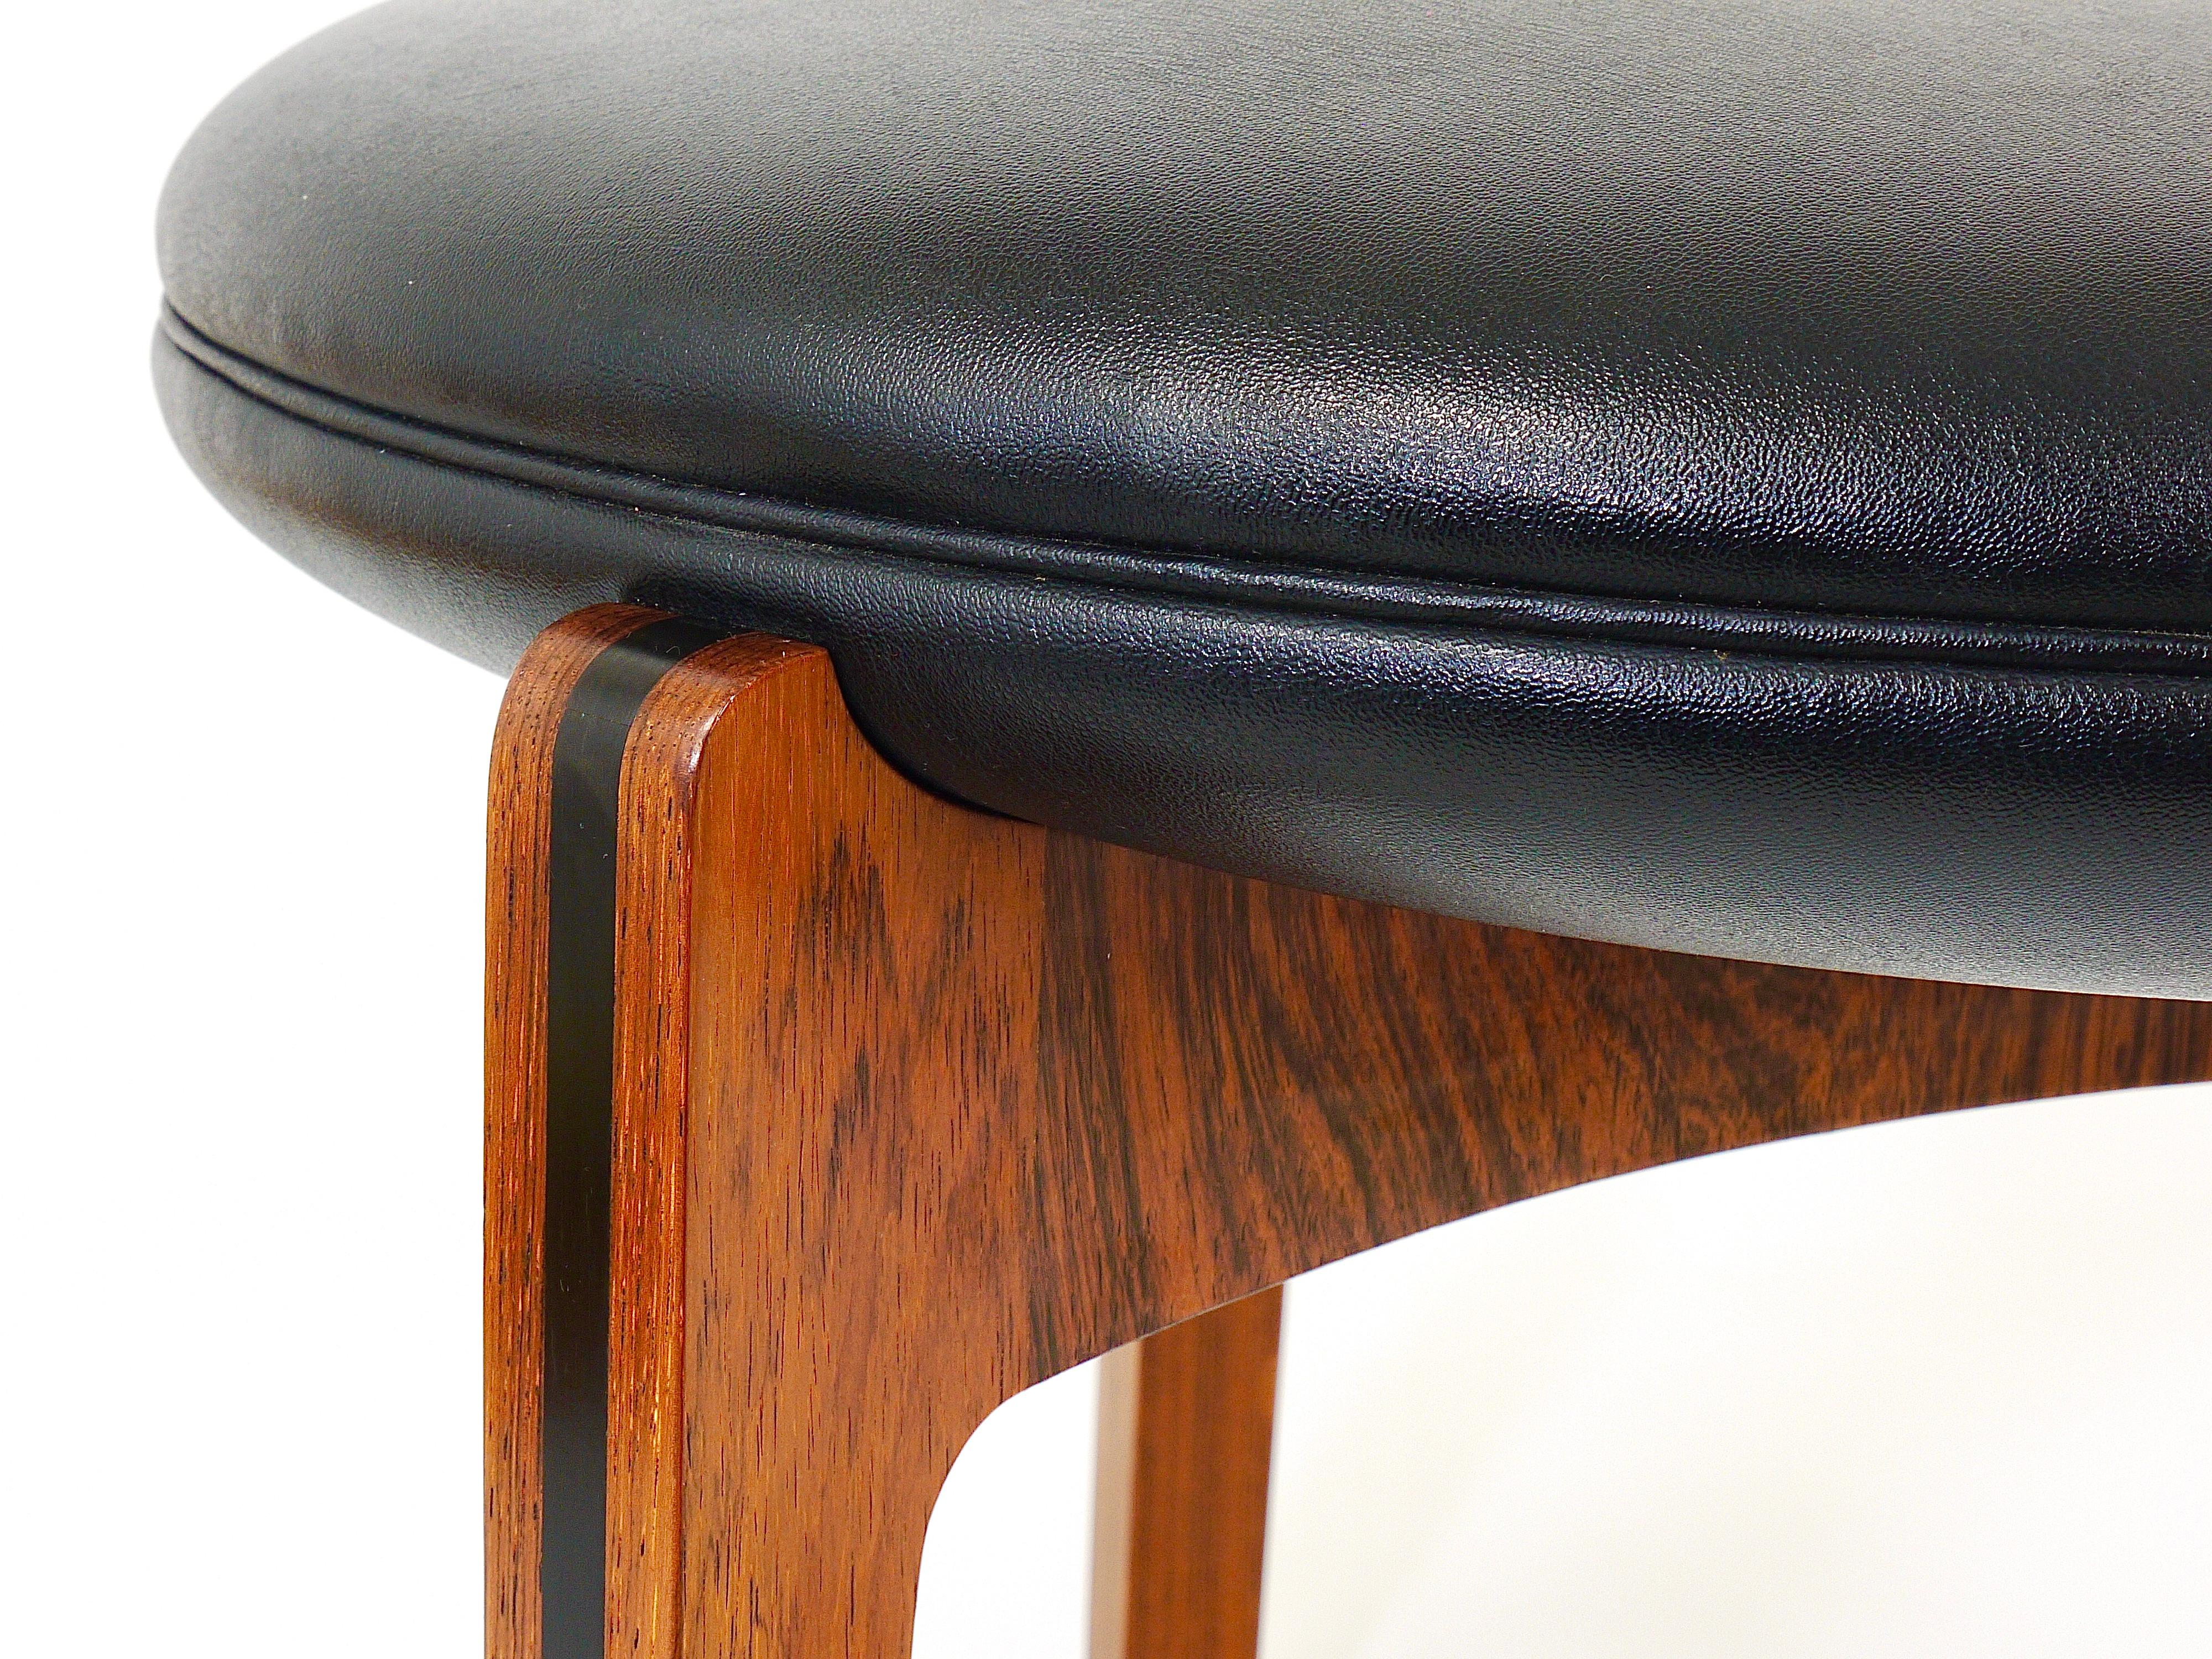 A beautiful Danish modernist stool from the 1960s, designed by Sven Ellekaer in 1962, manufactured by Christian Linneberg Møbelfabrik in Denmark. A round black skai leather cushion seating on a tripod rosewood frame. In very good condition.